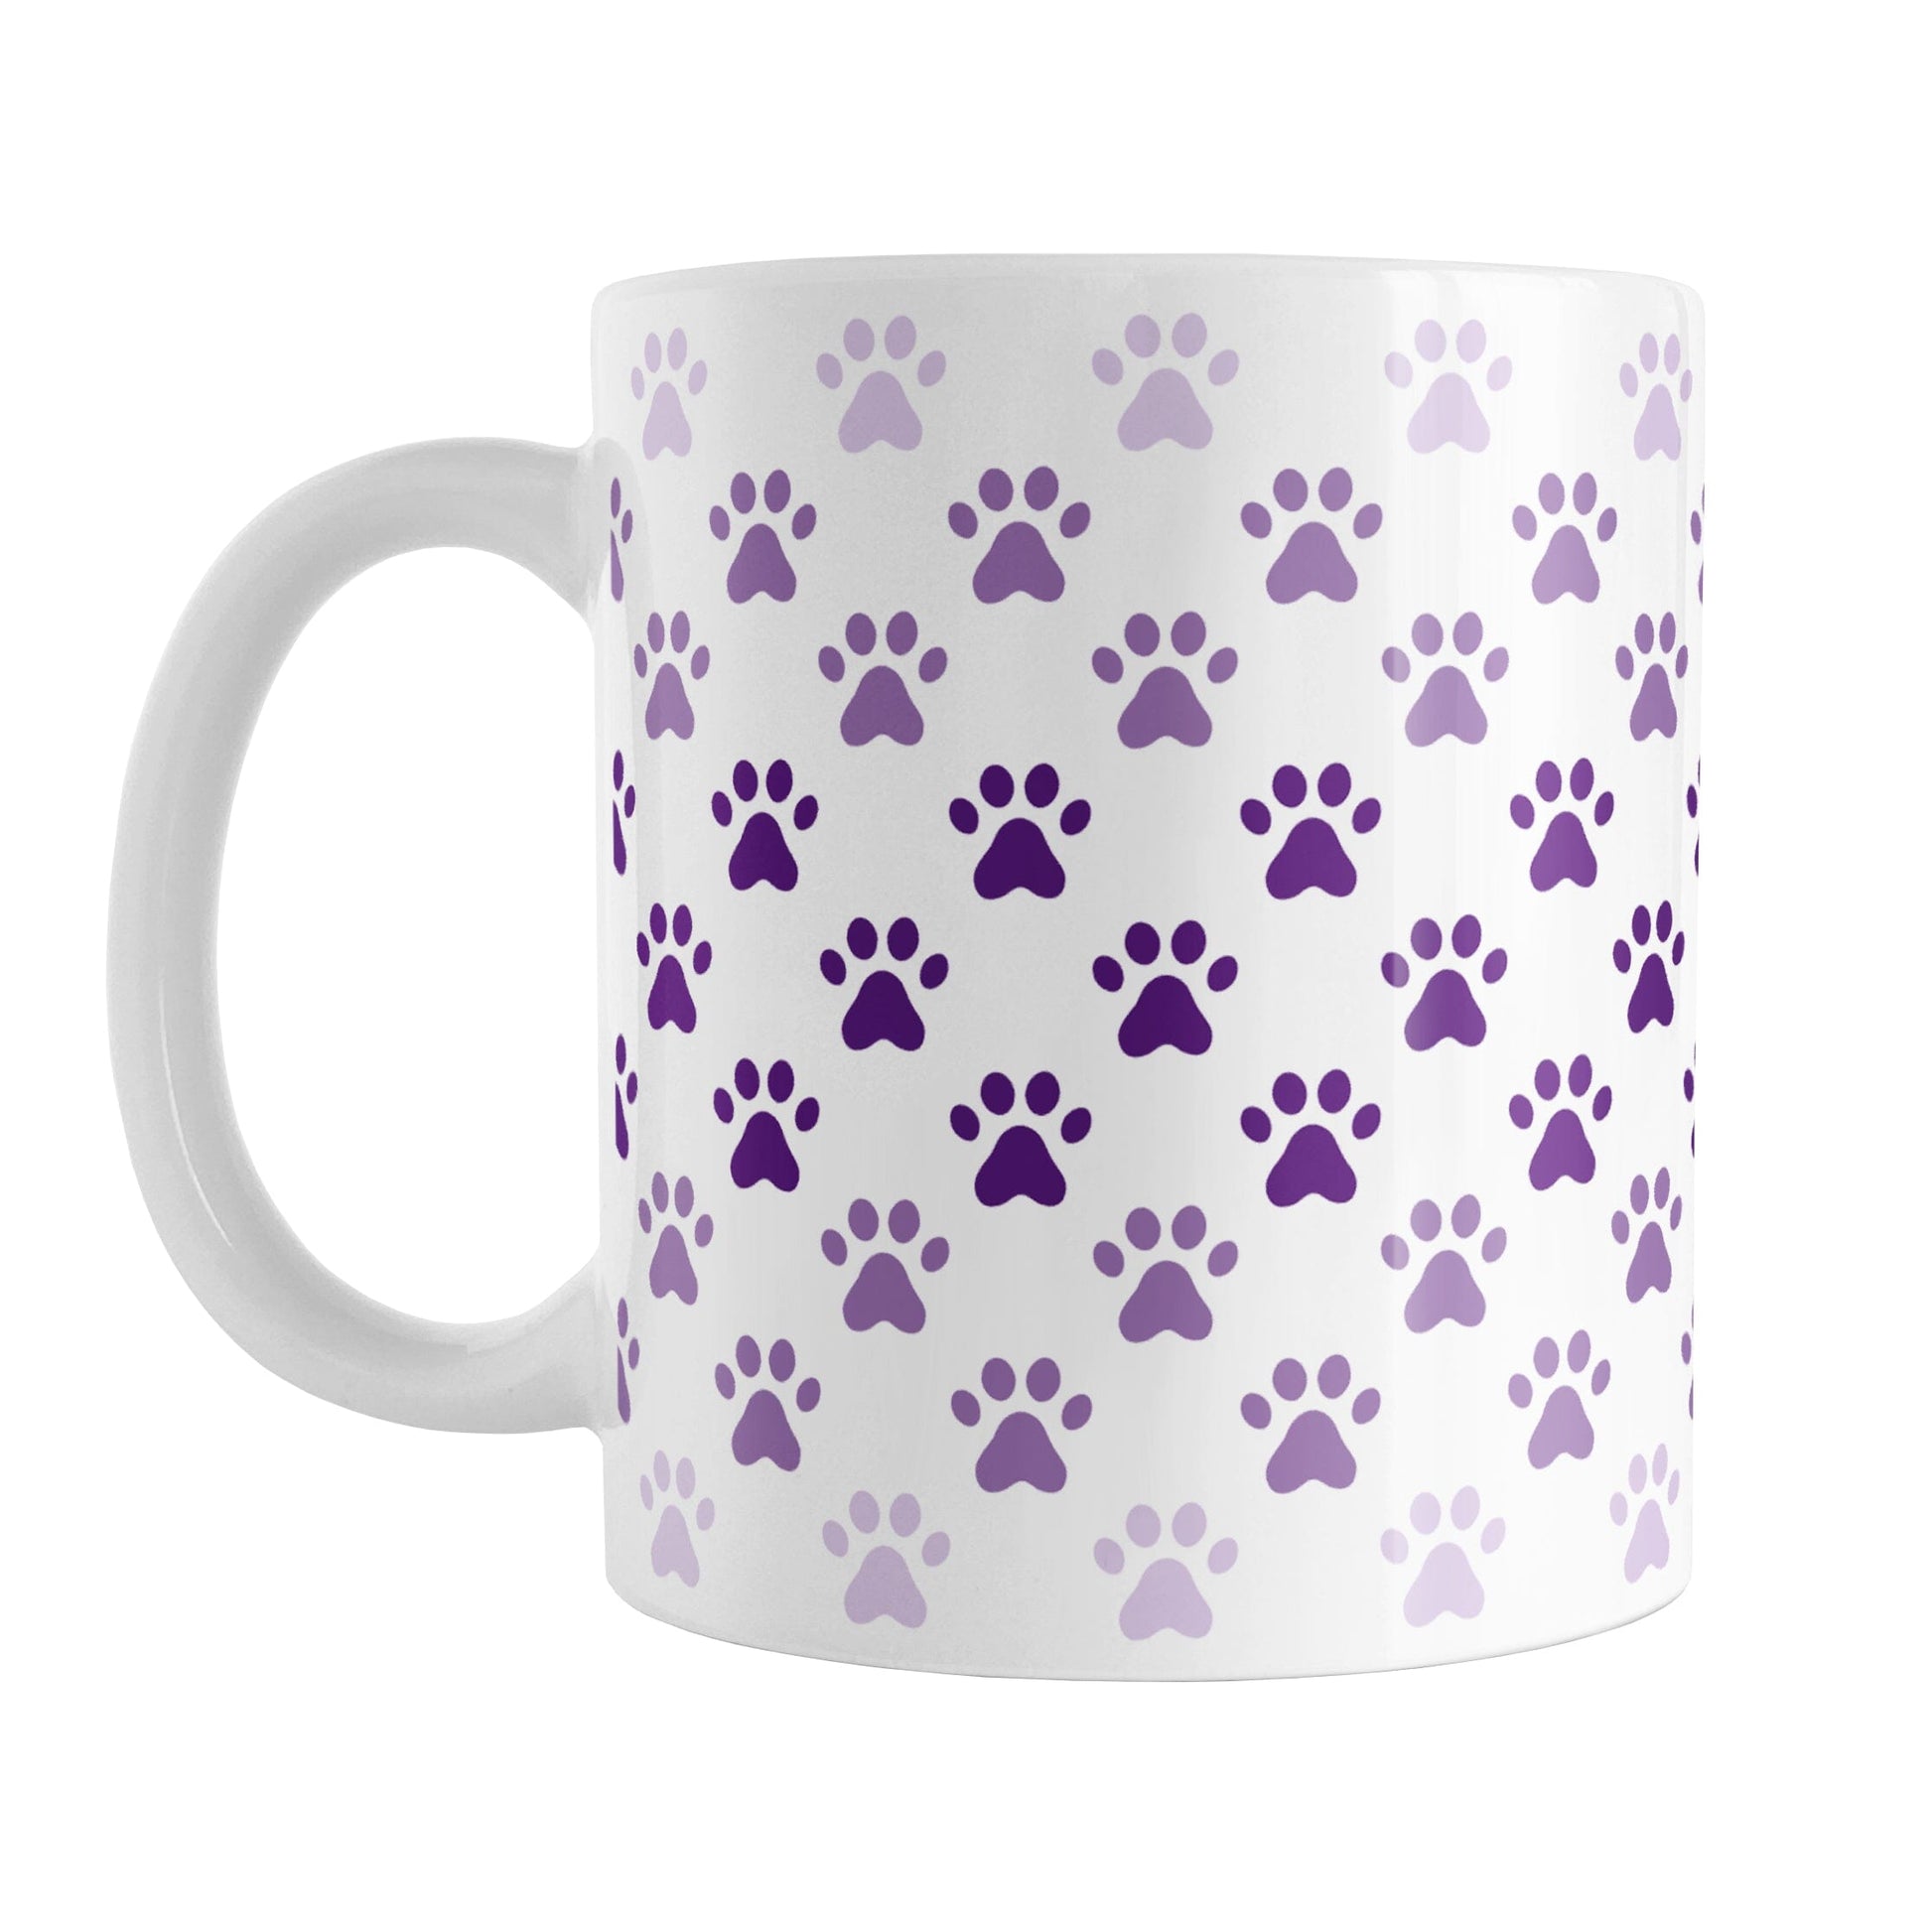 Paw Prints in Purple Mug (11oz) at Amy's Coffee Mugs. A ceramic coffee mug designed with paw prints in different shades of purple, with the darker purple color across the middle and the lighter purple along the top and bottom, in a pattern that wraps around the mug to the handle.